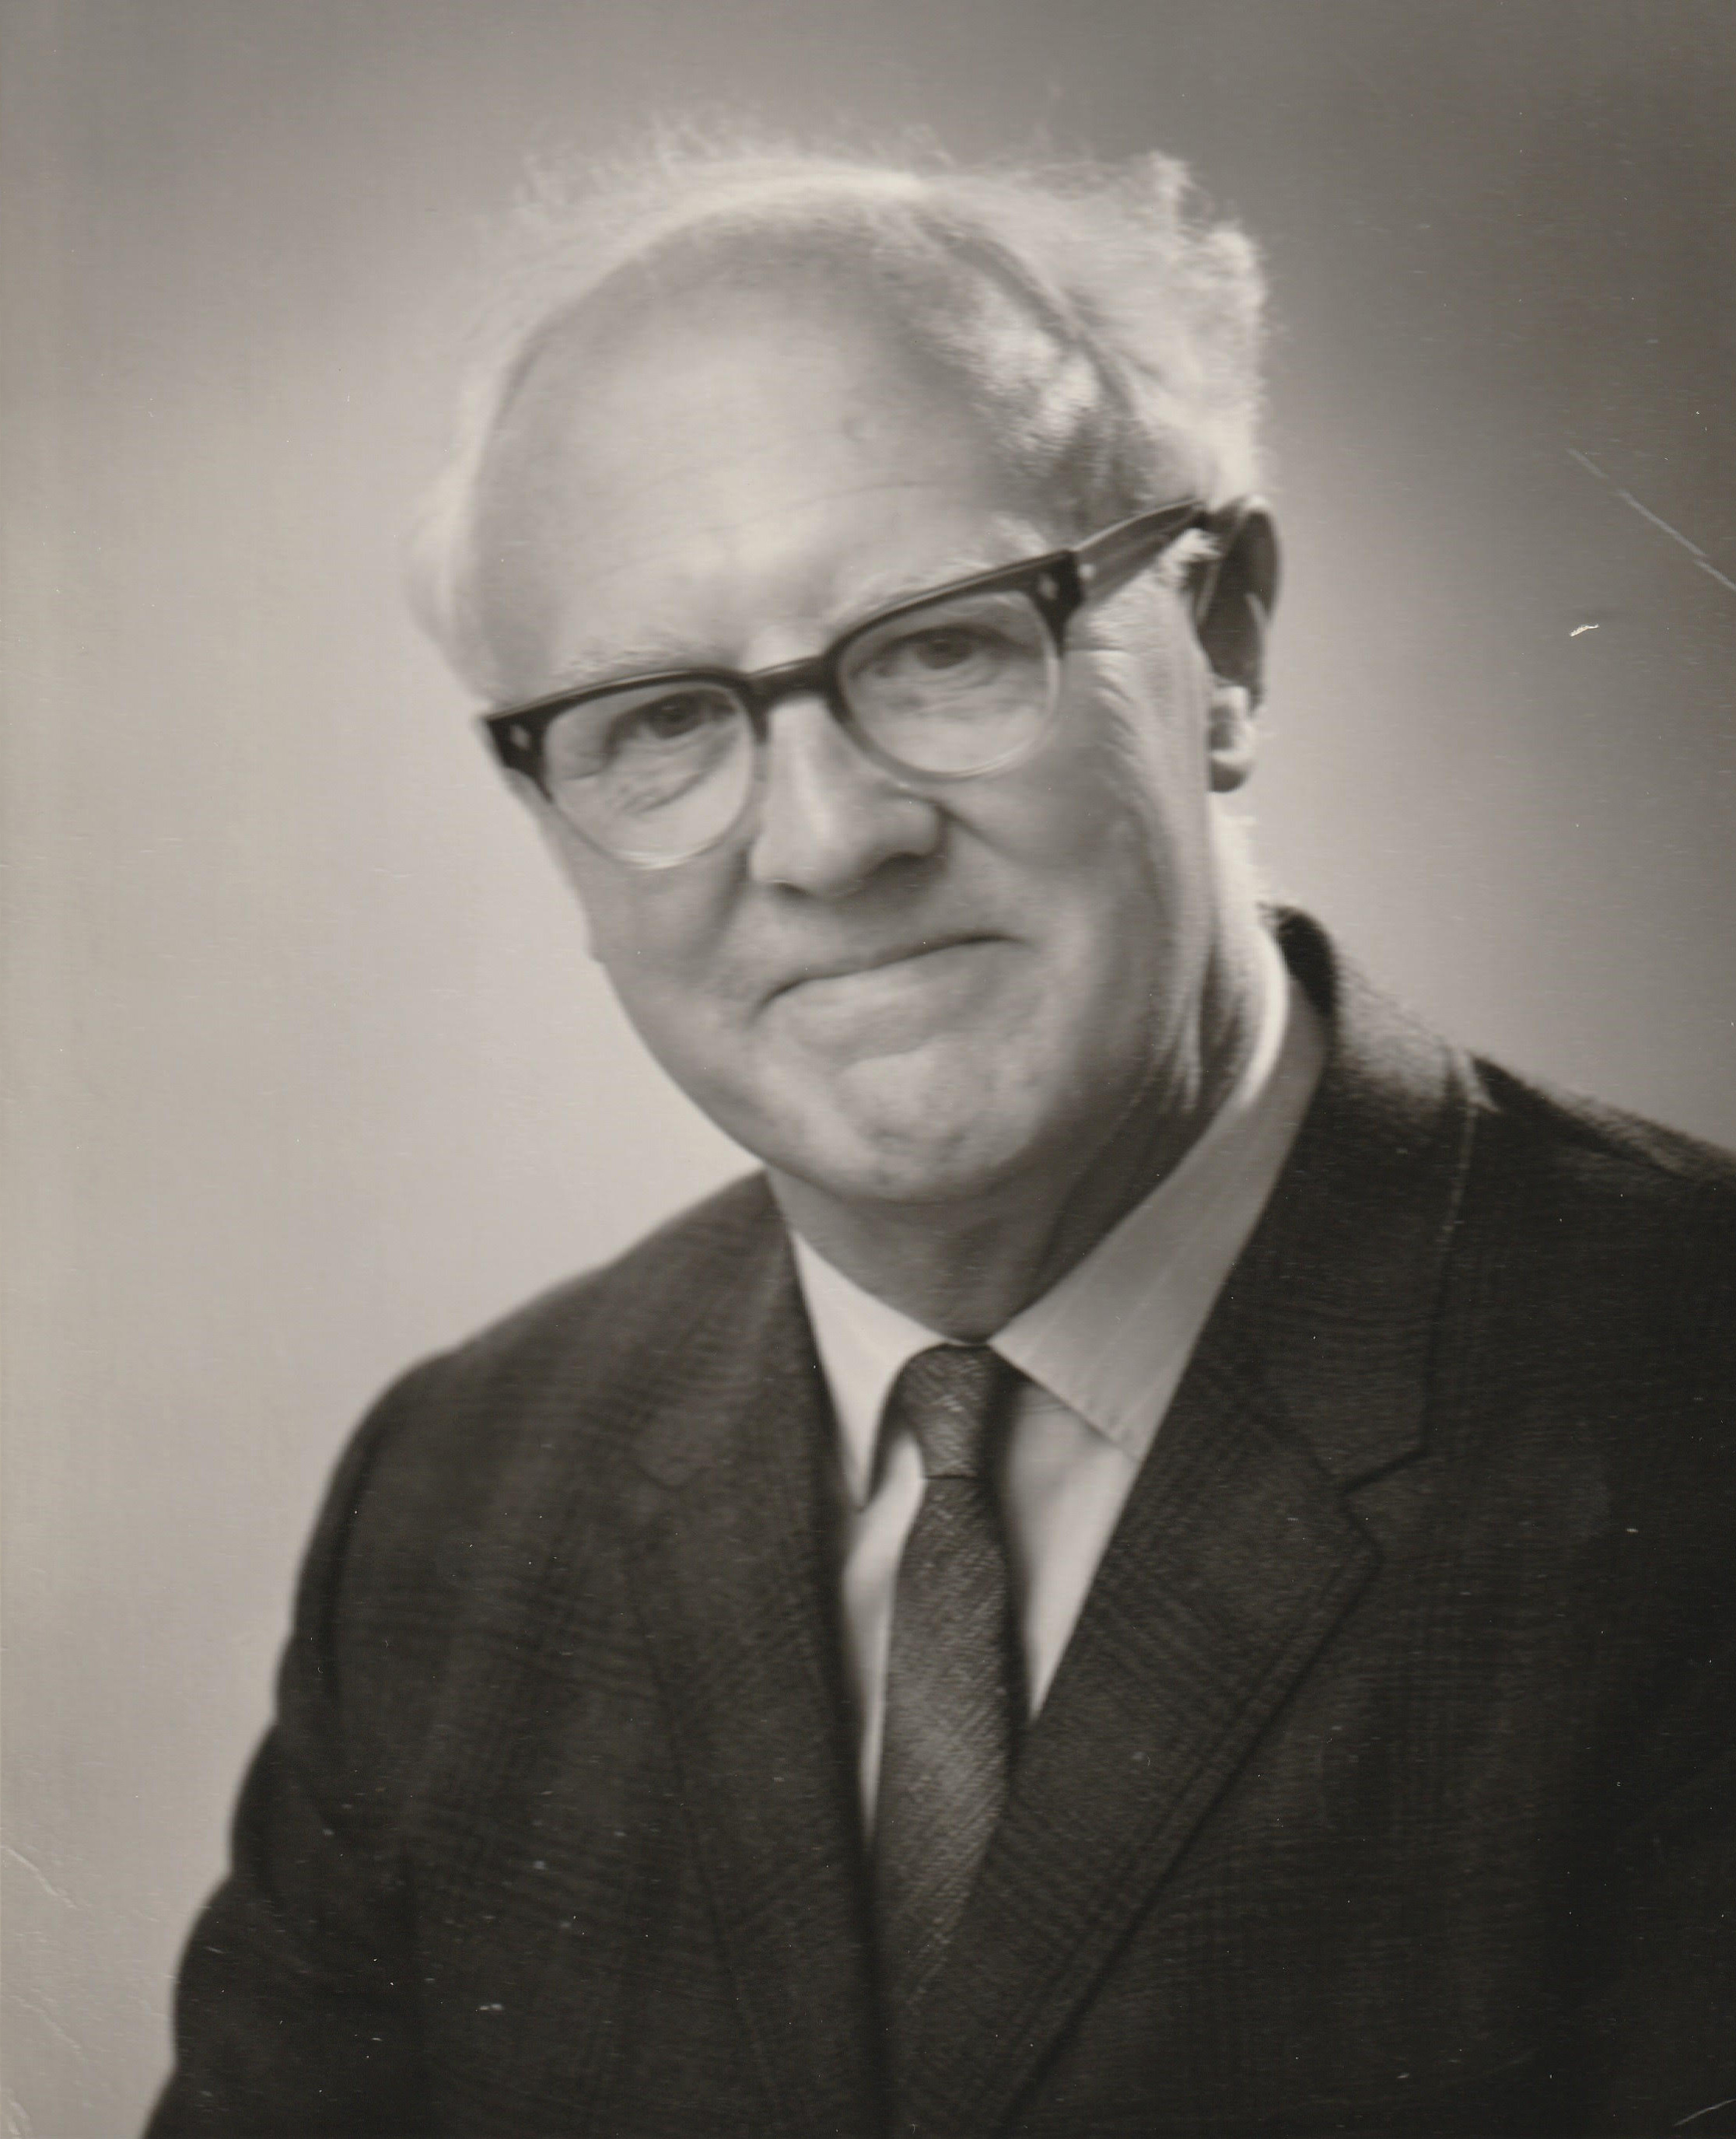 Scan of official photographic portrait of particle physicist Carl Westcott, supplied by his newphew, Peter Coggan.